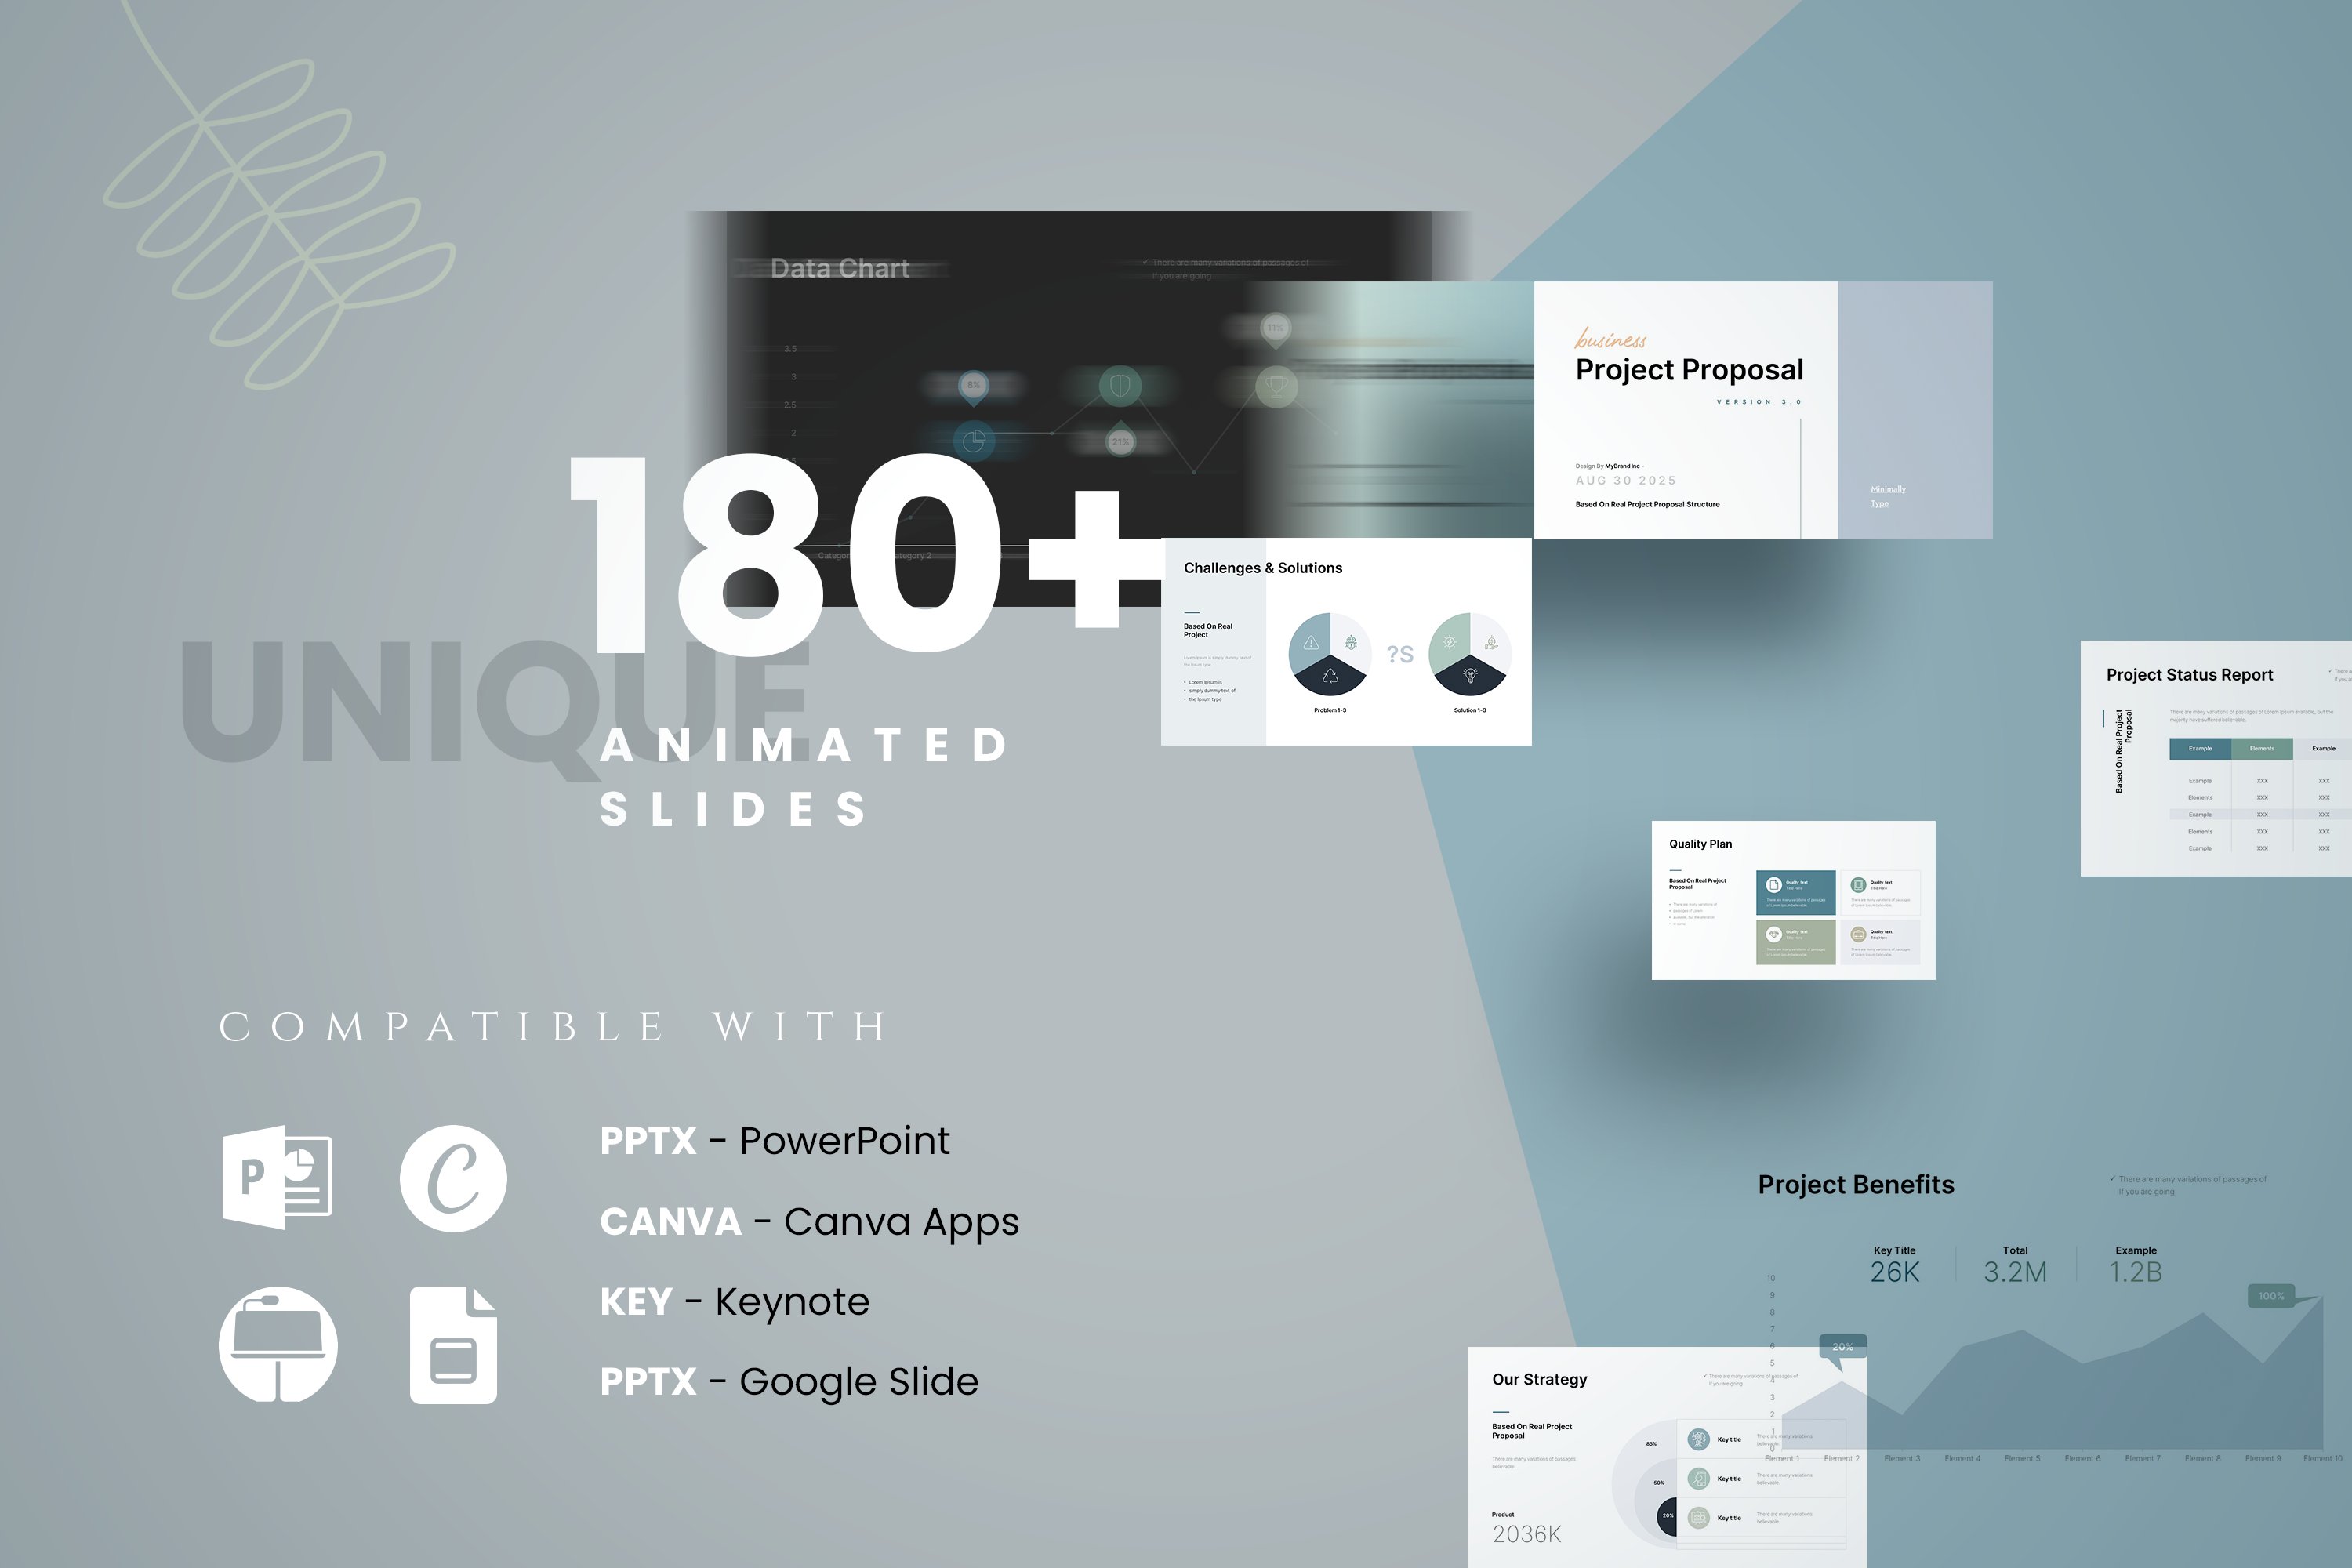 3 project proposal canva powerpoint presentation template 796